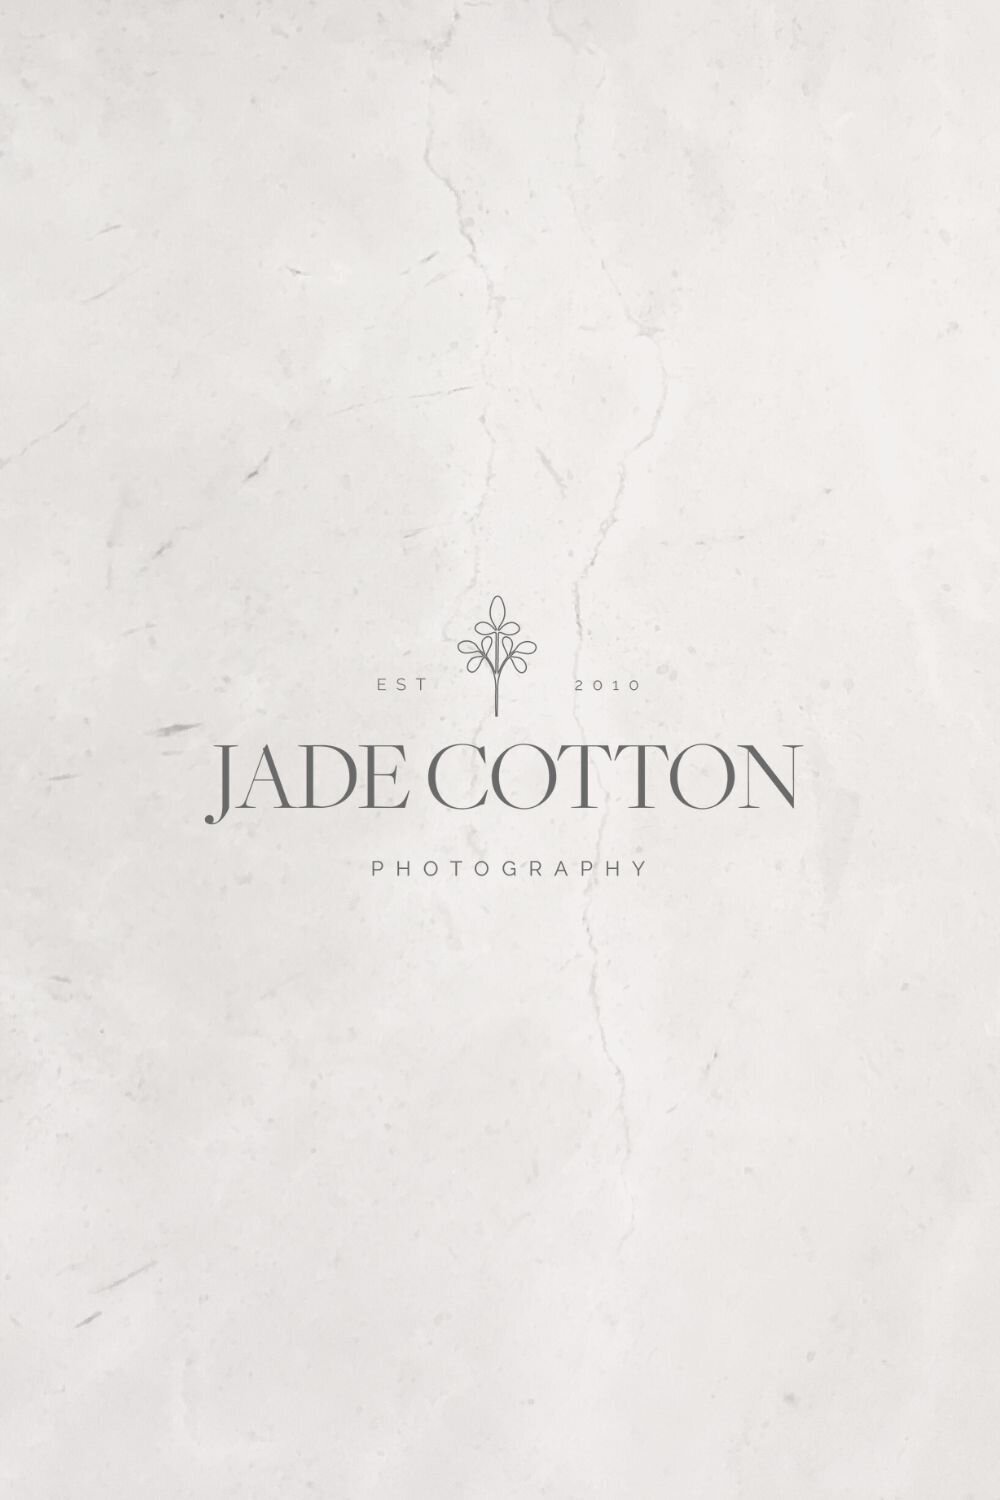 Branding for photographers who needs a n elegant and a bit more bolder brand. With a blue and gray color palette it works for both wedding and family photographers